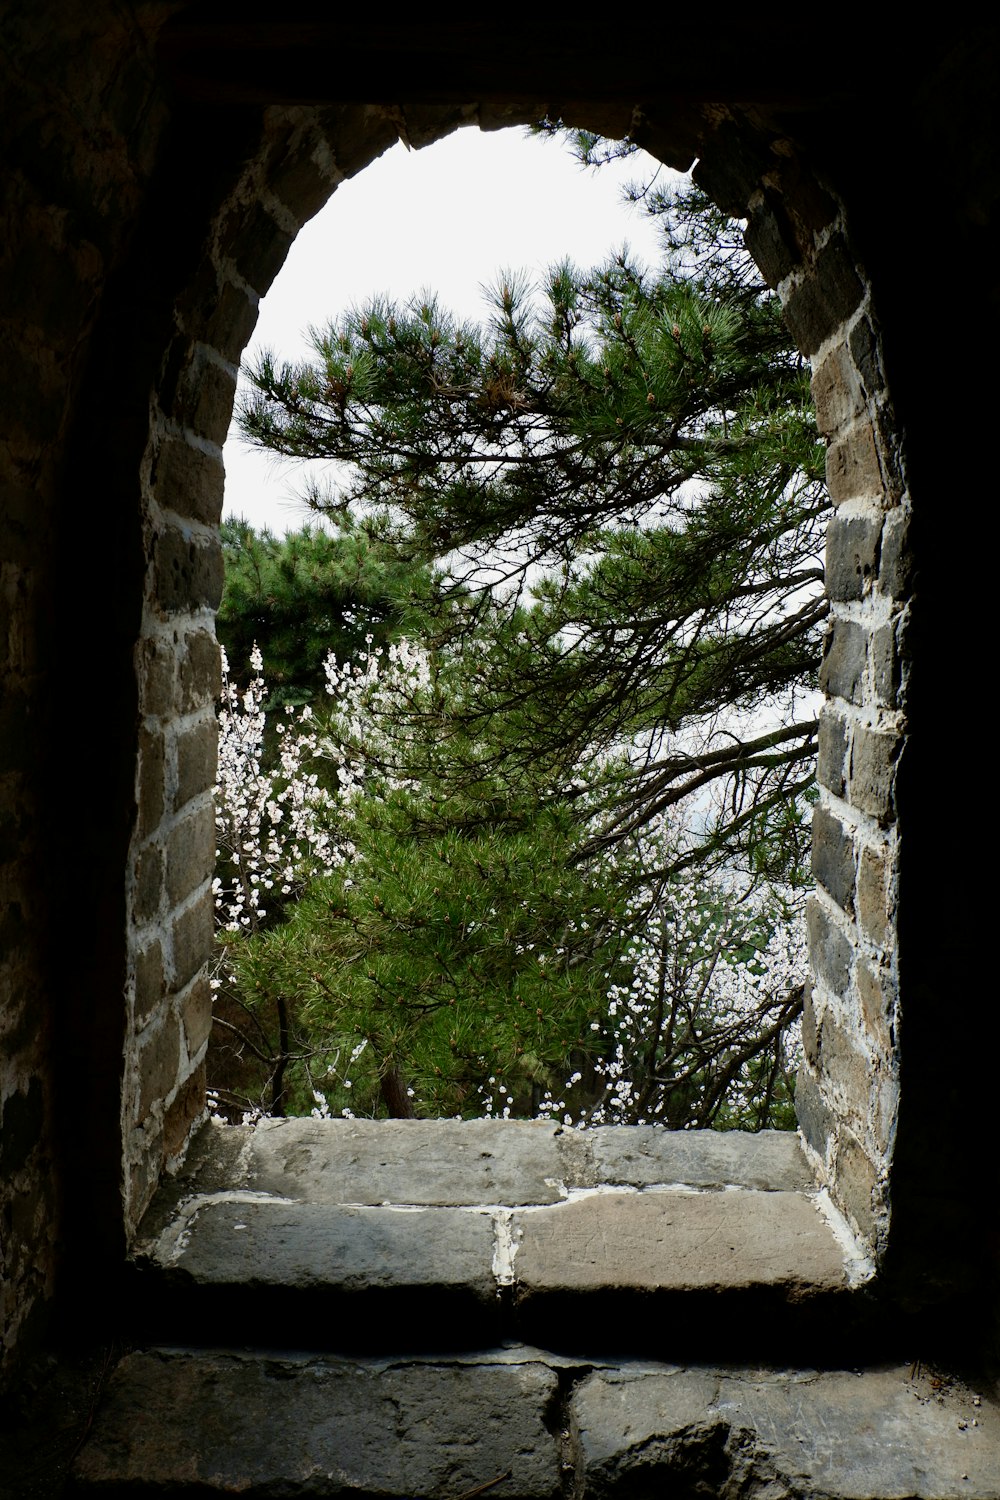 a window in a stone wall with trees in the background